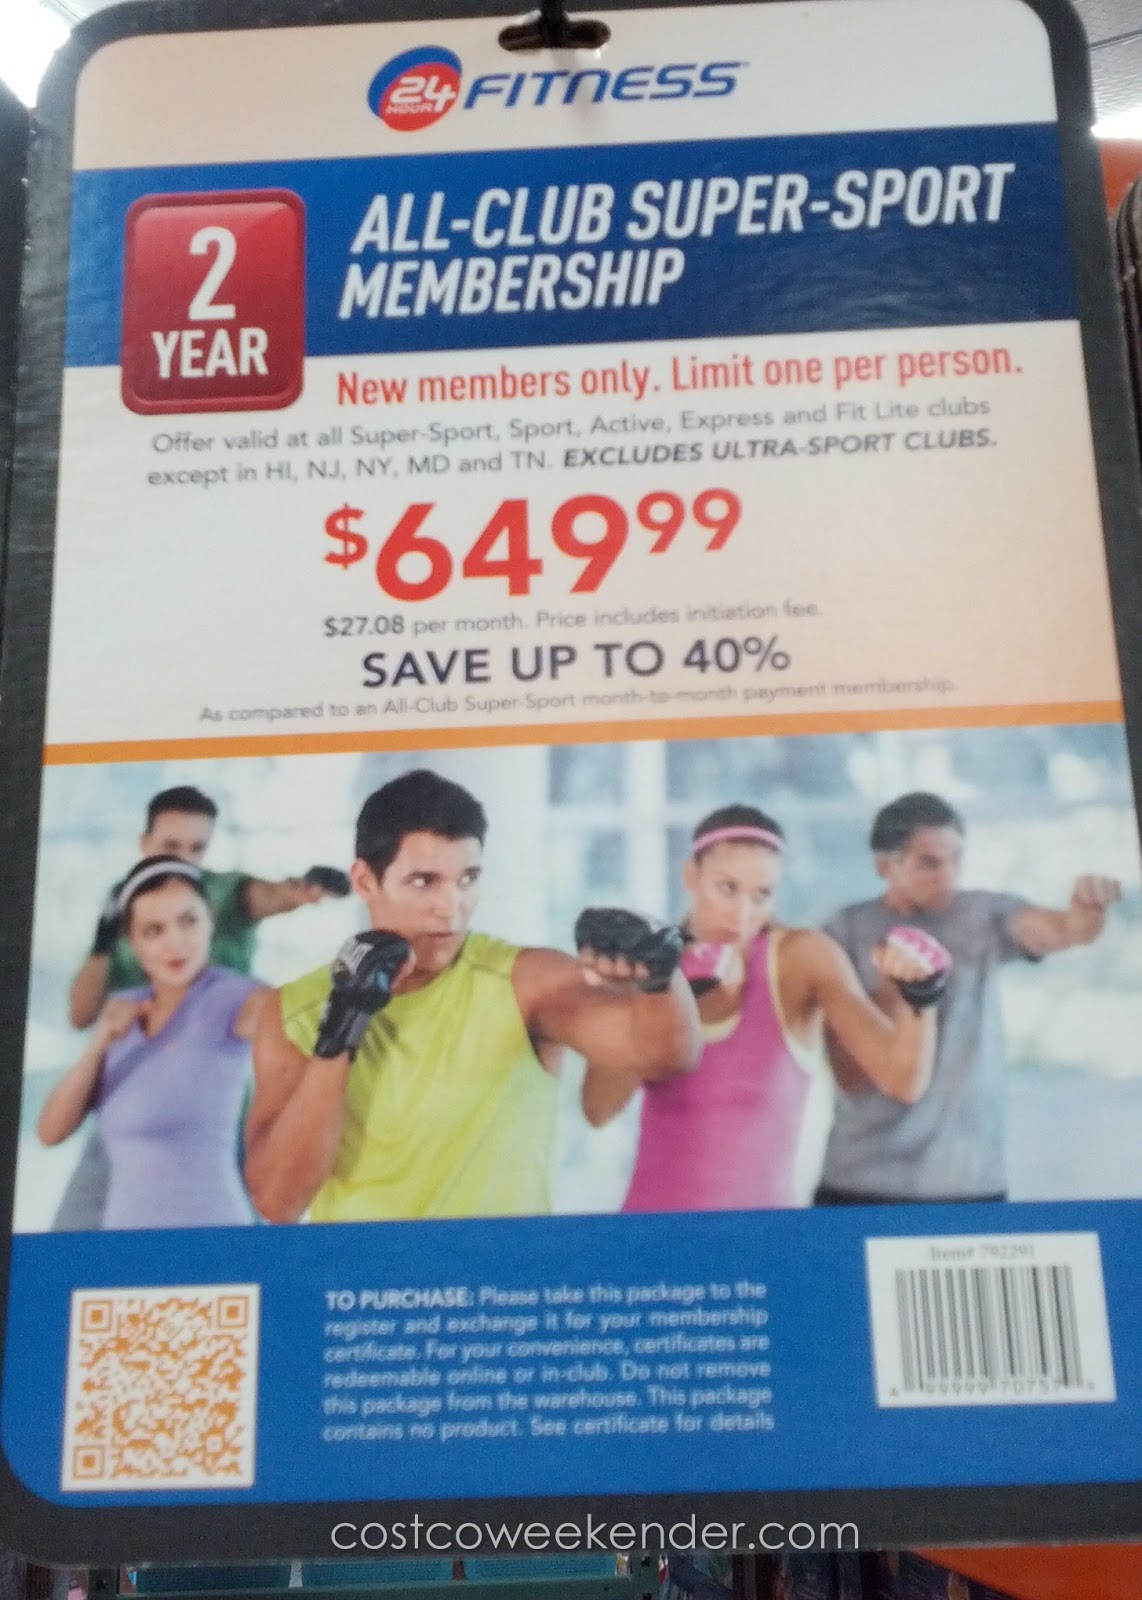  24 Hour Fitness Yearly Membership Price for Beginner